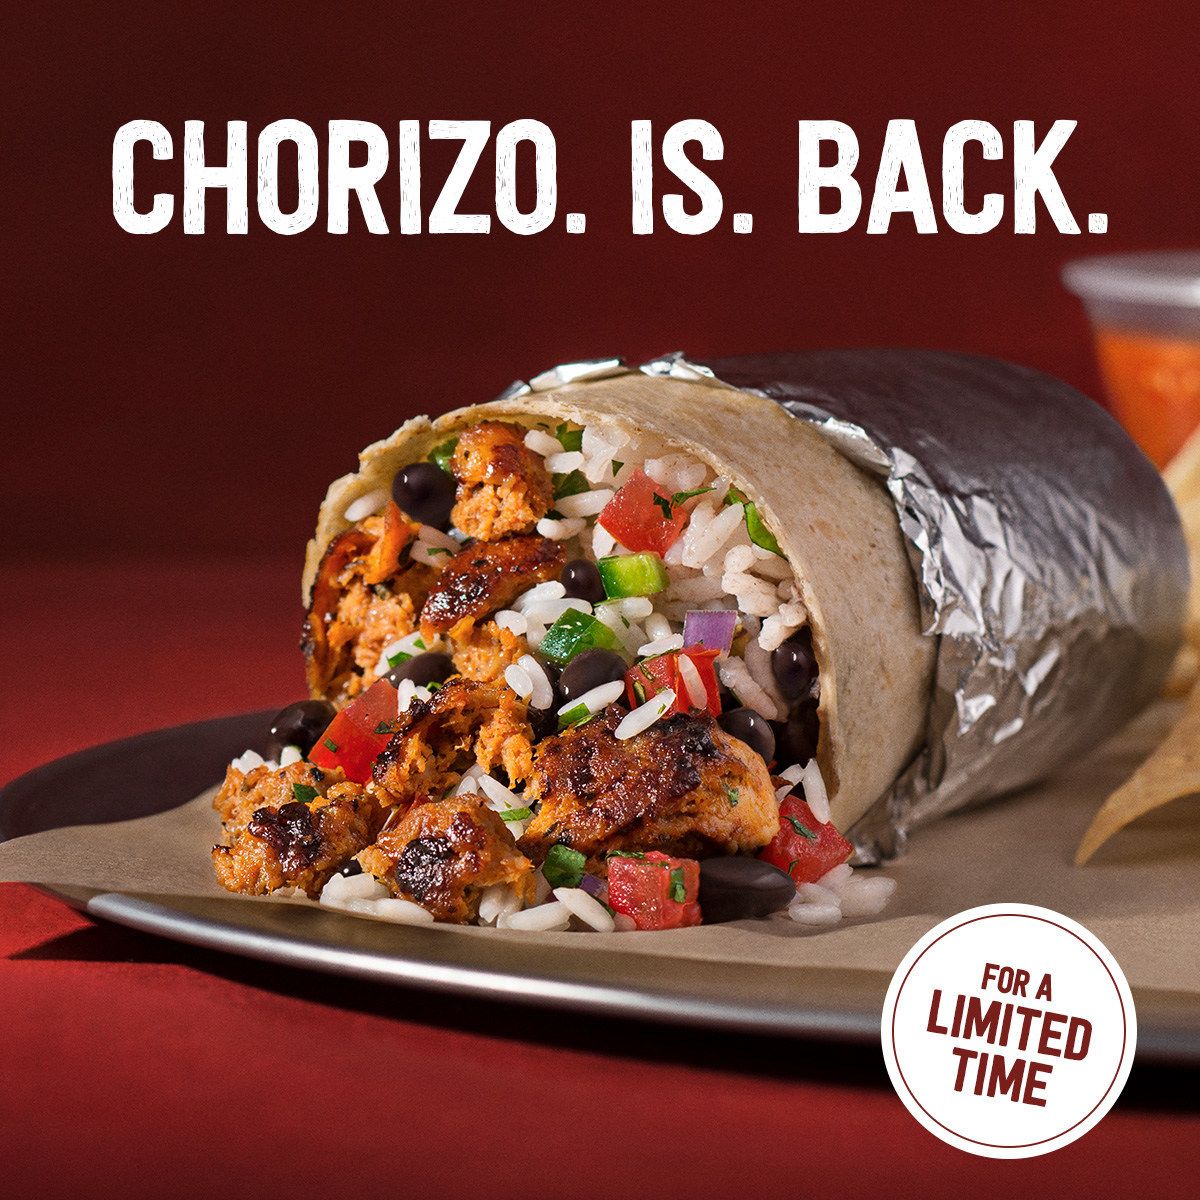 Chipotle Brought Back Chorizo, But It's Only Here For A Limited Time